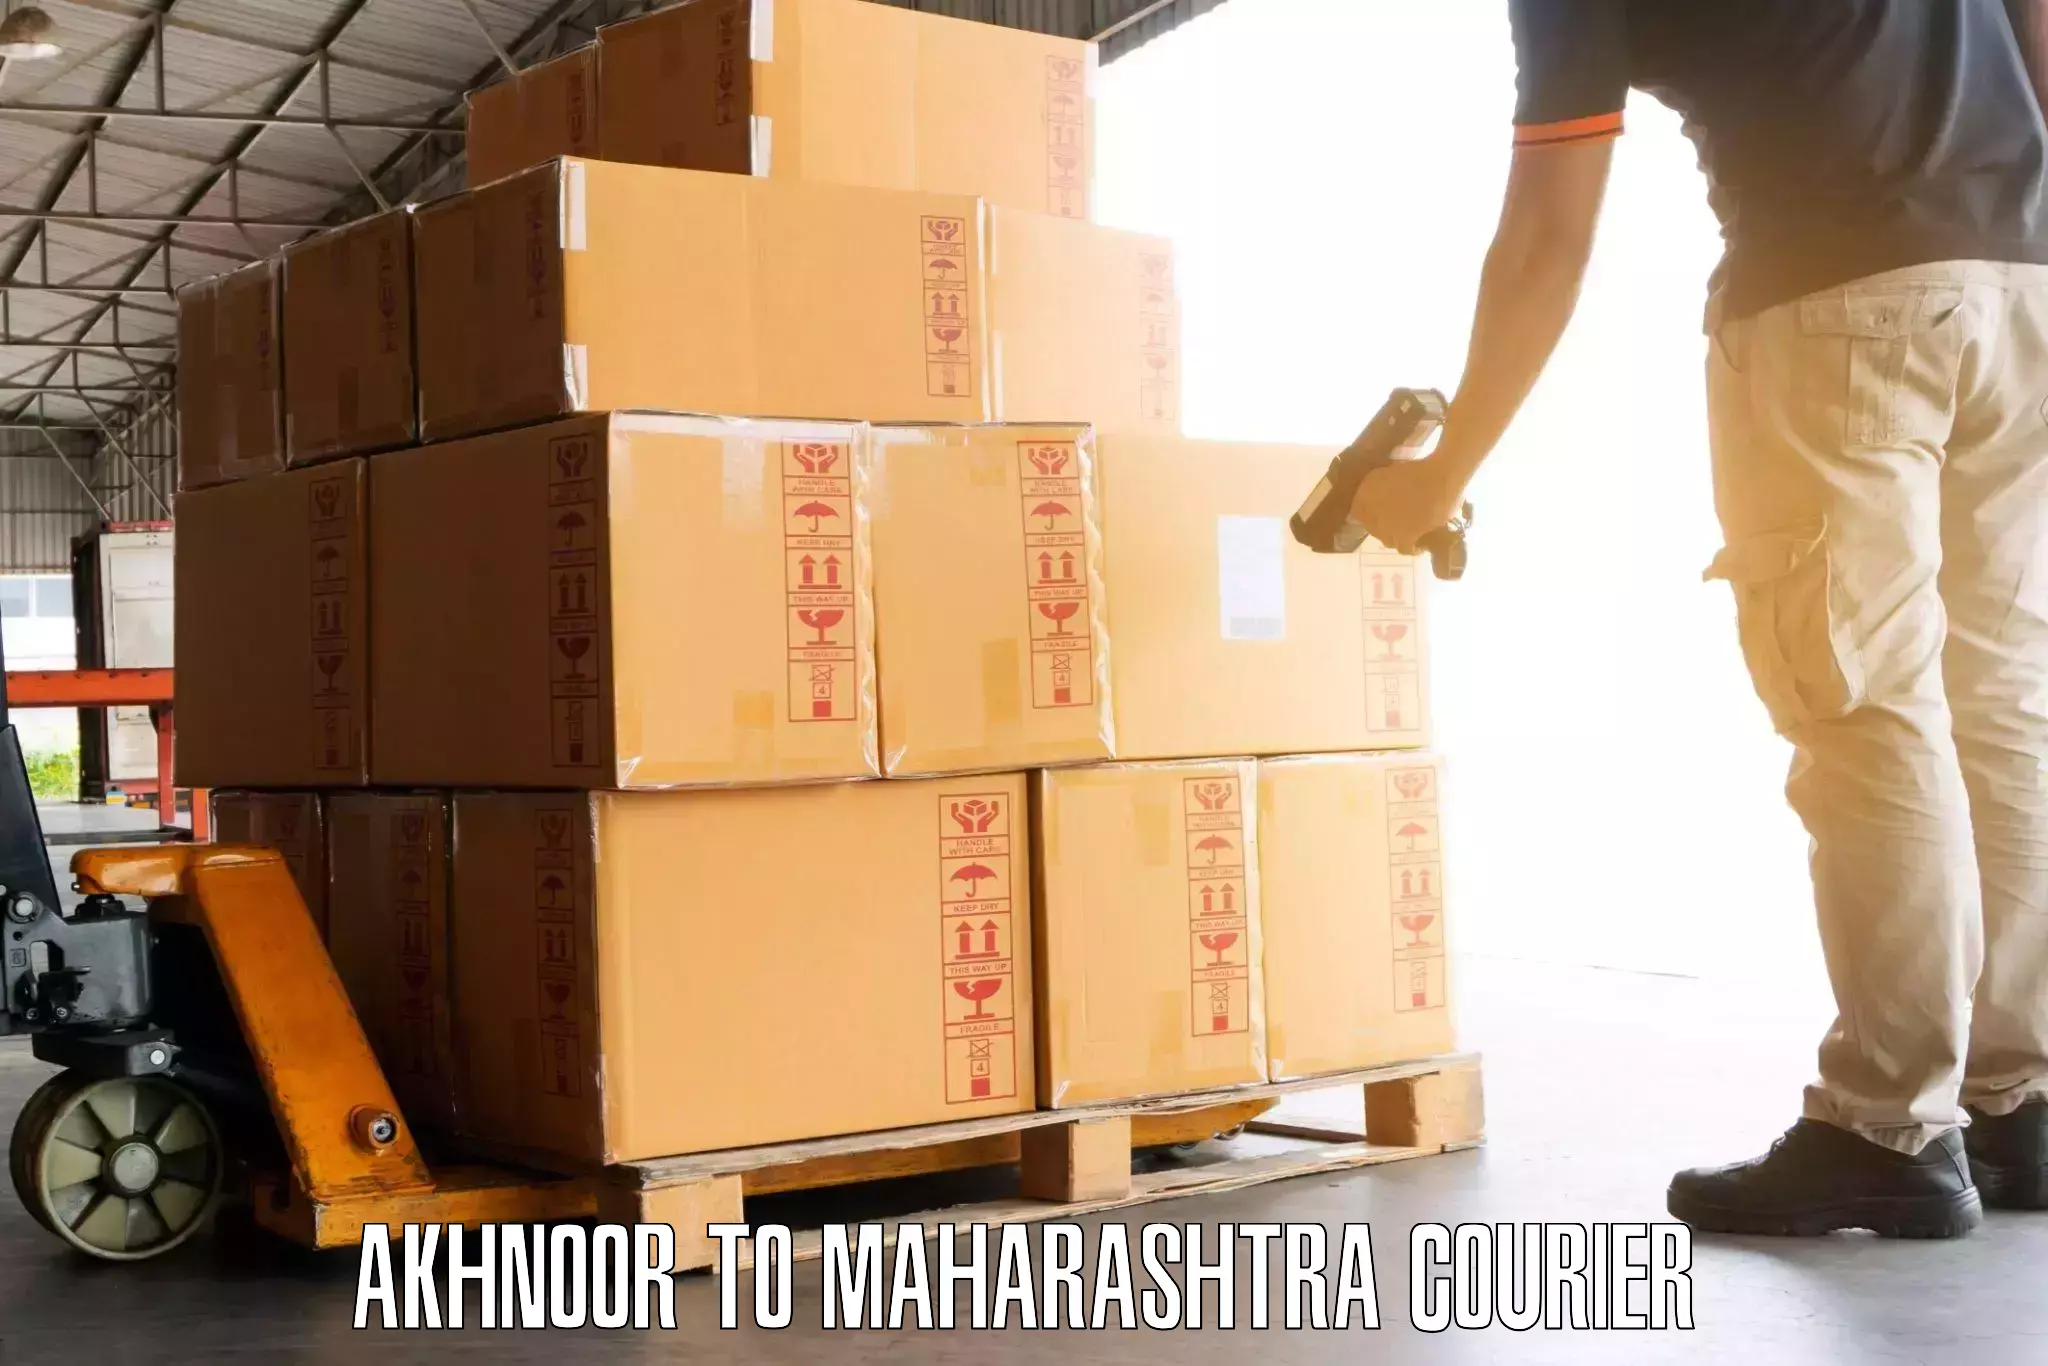 Luggage shipment specialists Akhnoor to Dhule